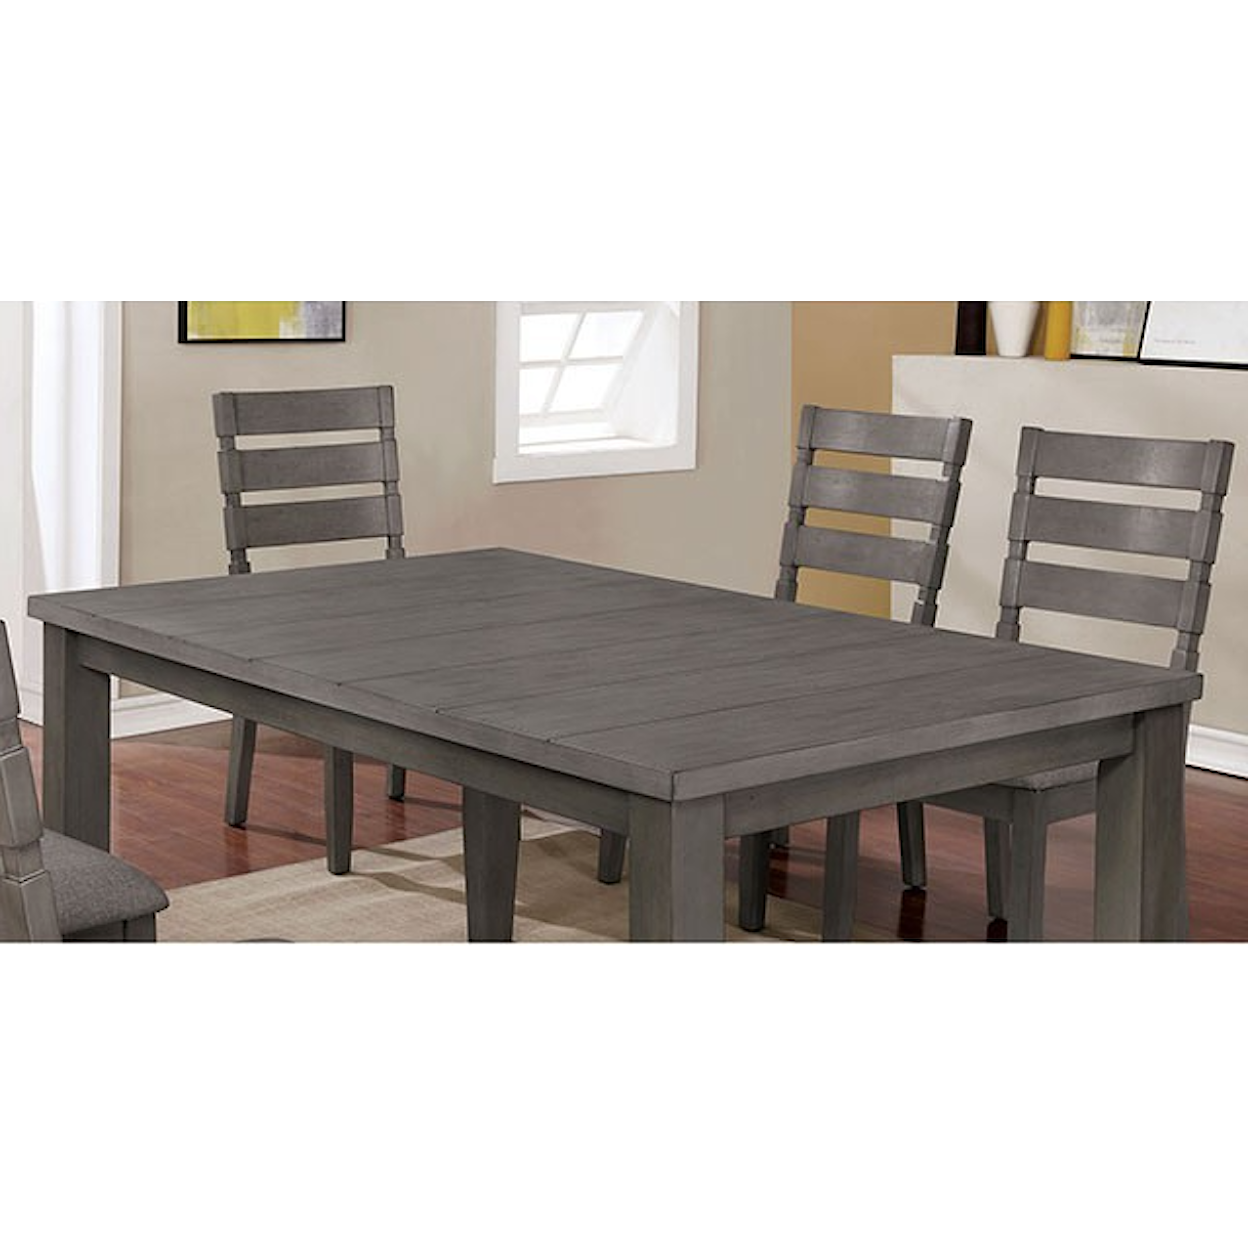 Furniture of America Viana Dining Table